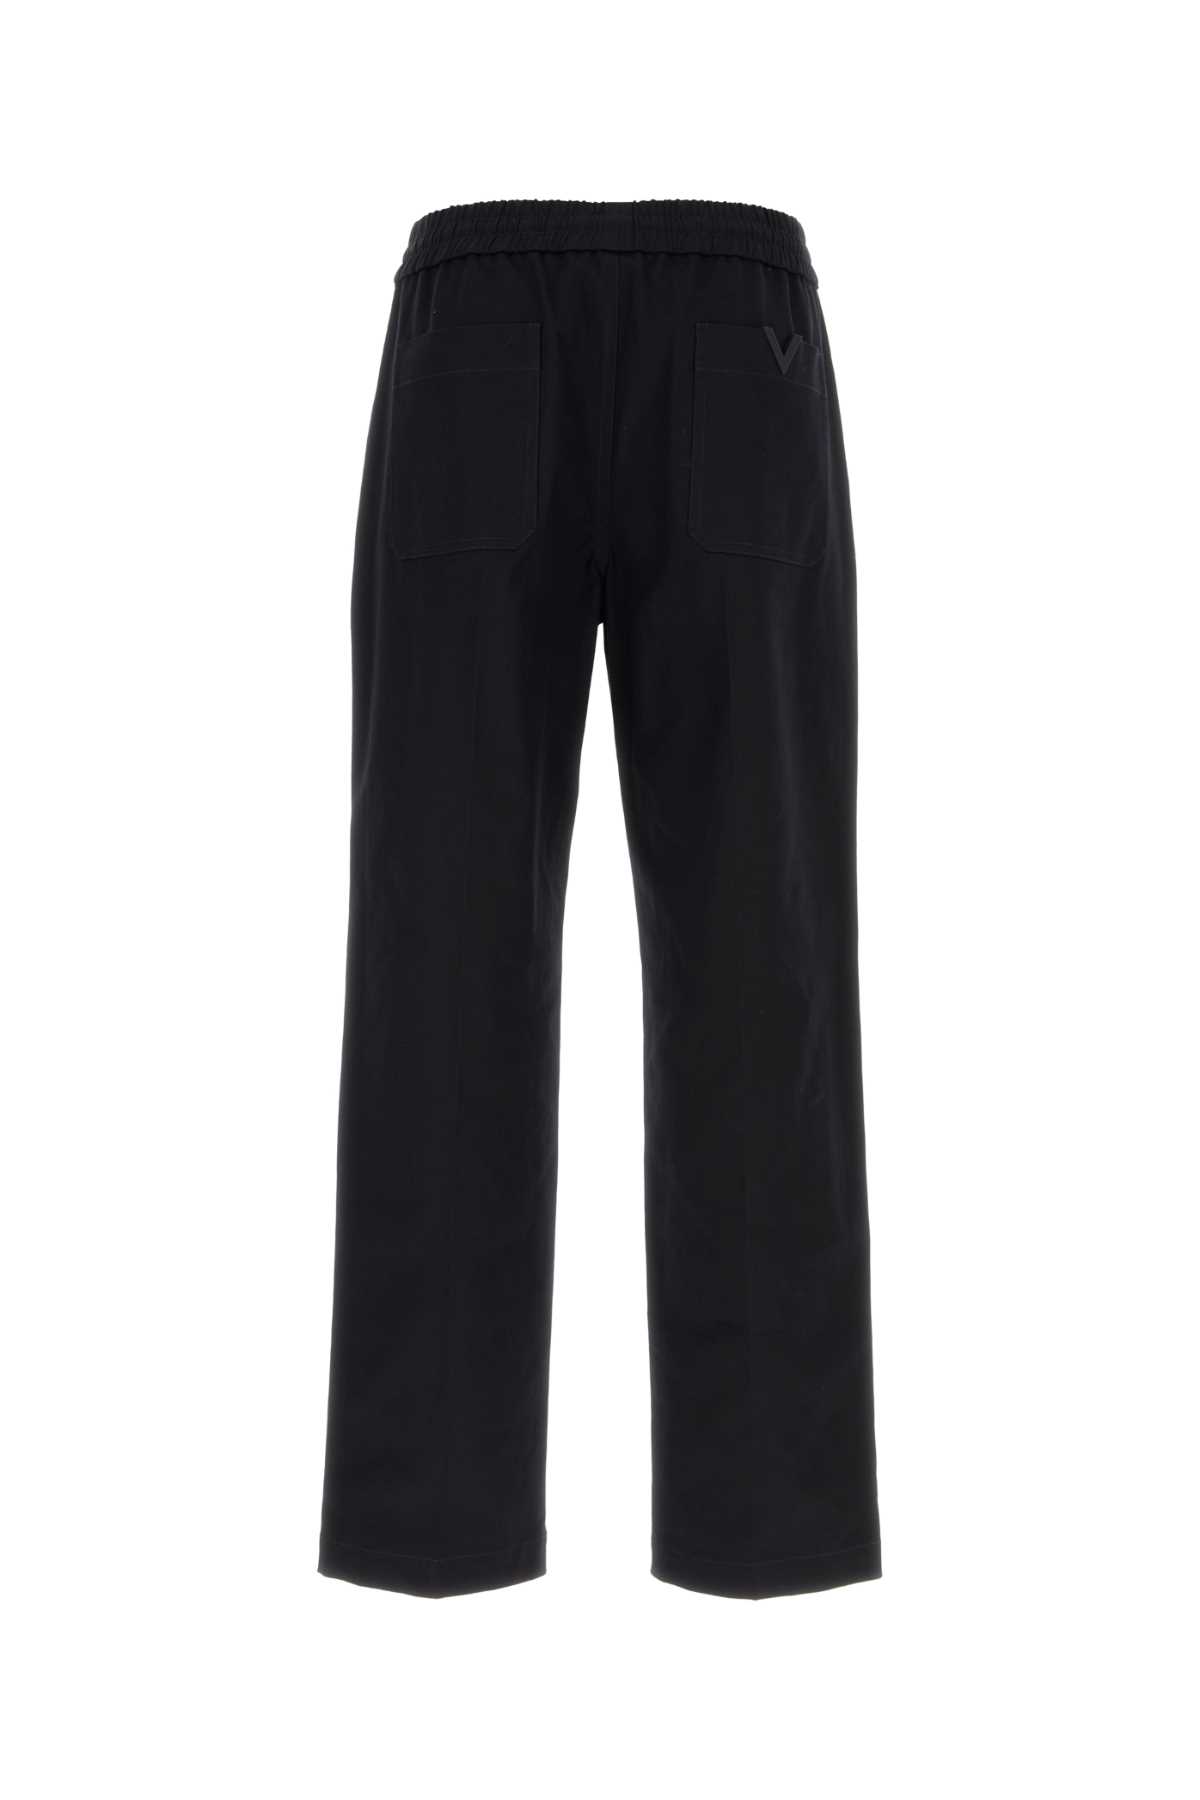 Valentino Midnight Blue Stretch Cotton Pant In Navy